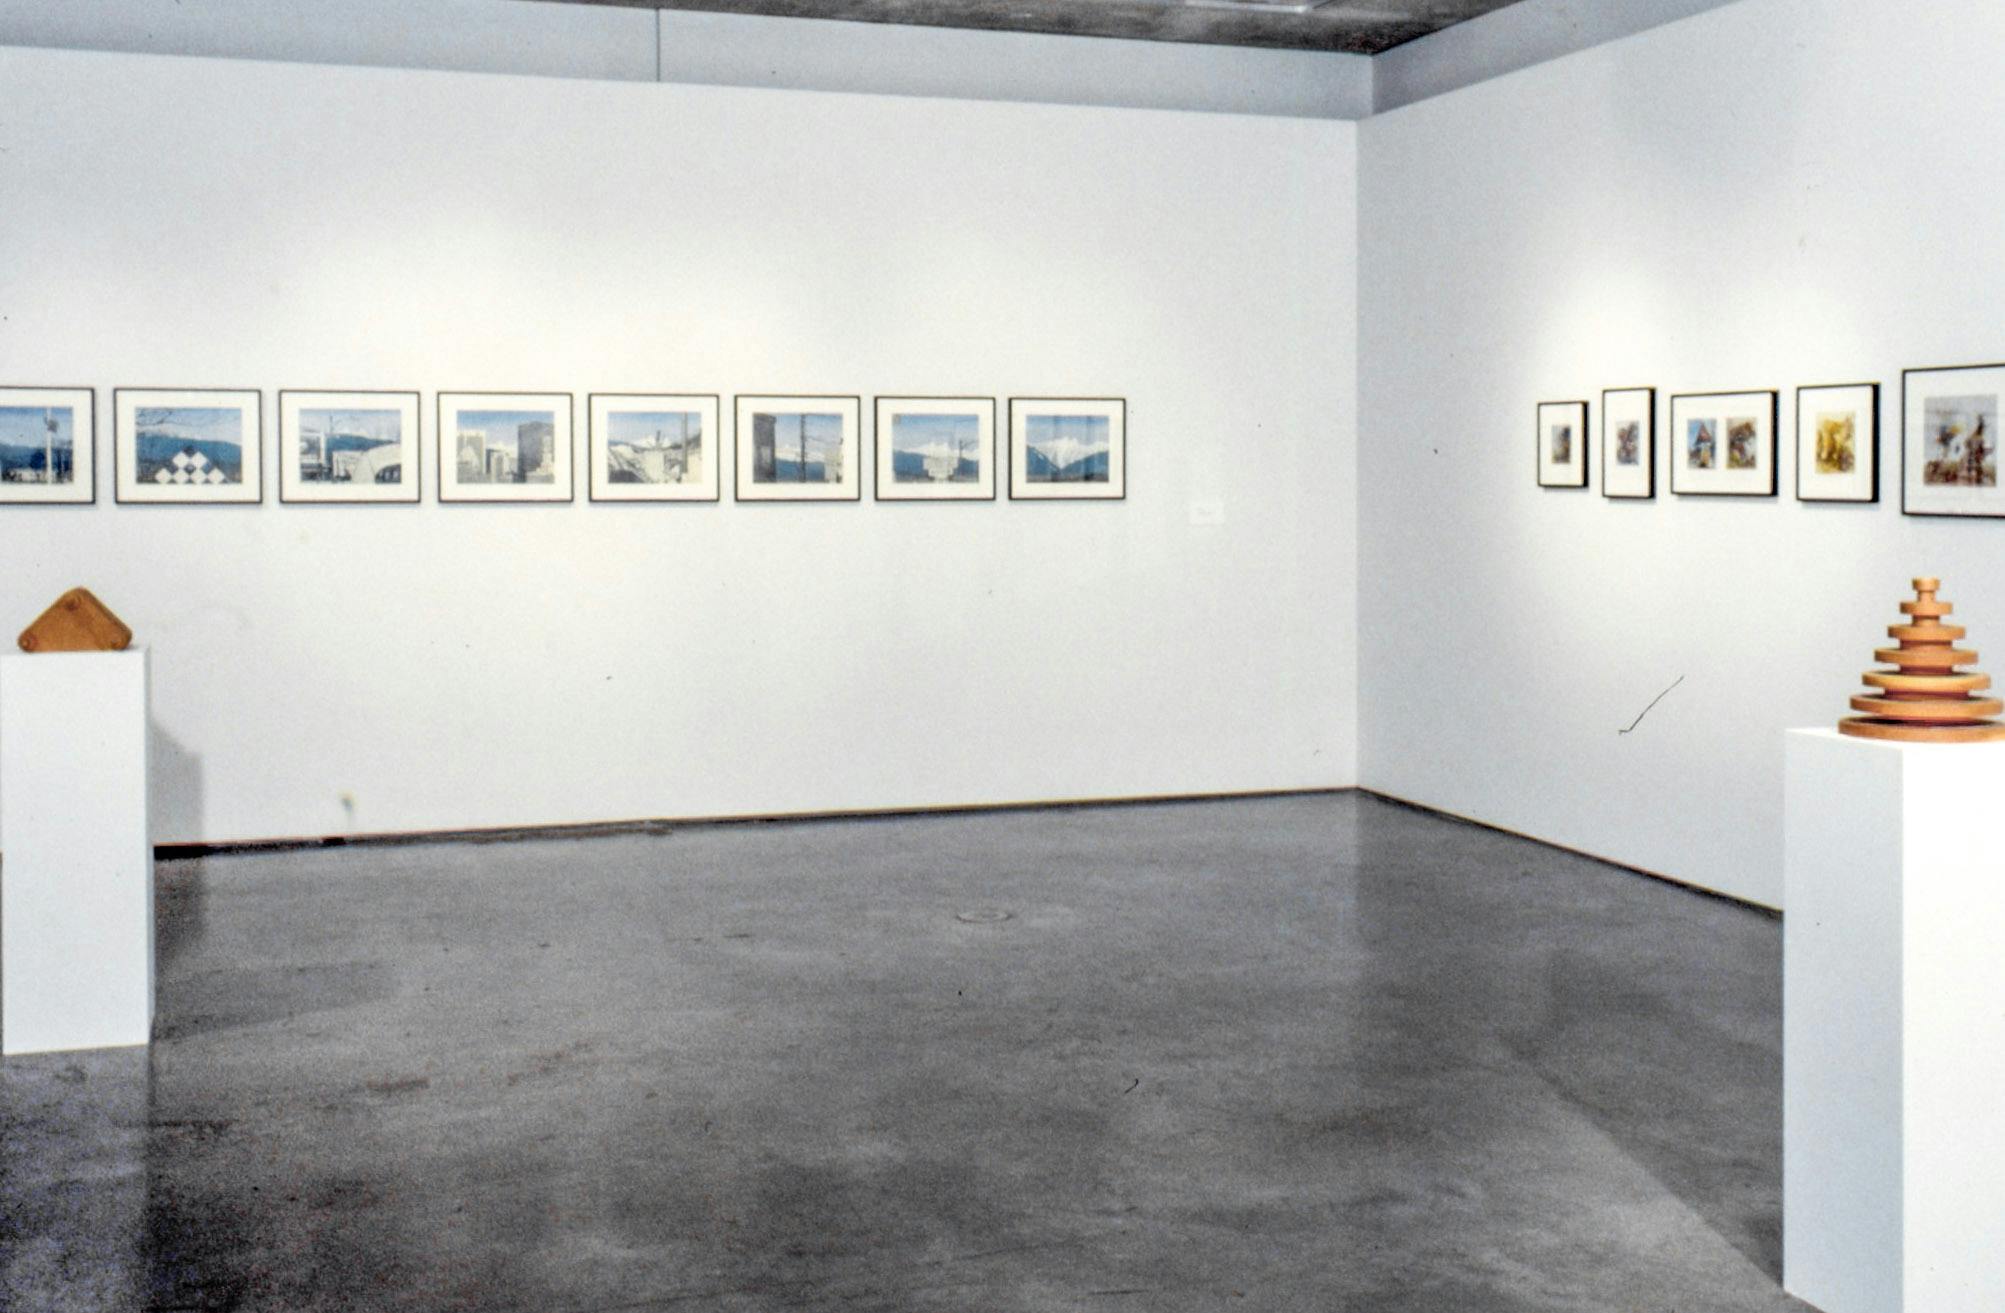 In a gallery space, a set of blue and white landscape drawings and another set of small coloured drawings are mounted on the wall. Two wood sculptures are placed on pedestals.